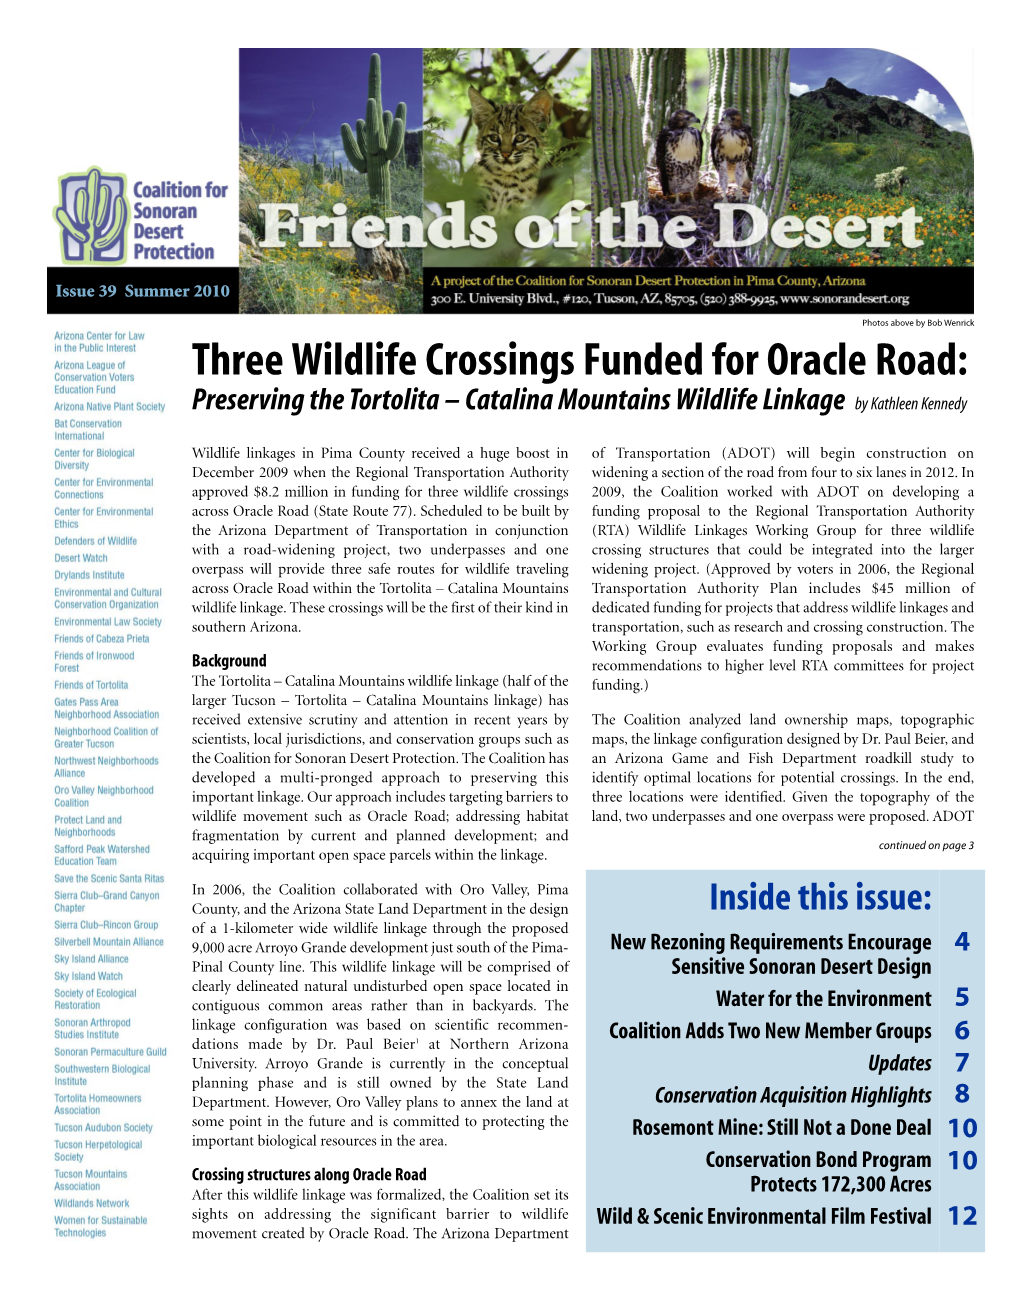 Three Wildlife Crossings Funded for Oracle Road: Preserving the Tortolita – Catalina Mountains Wildlife Linkage by Kathleen Kennedy